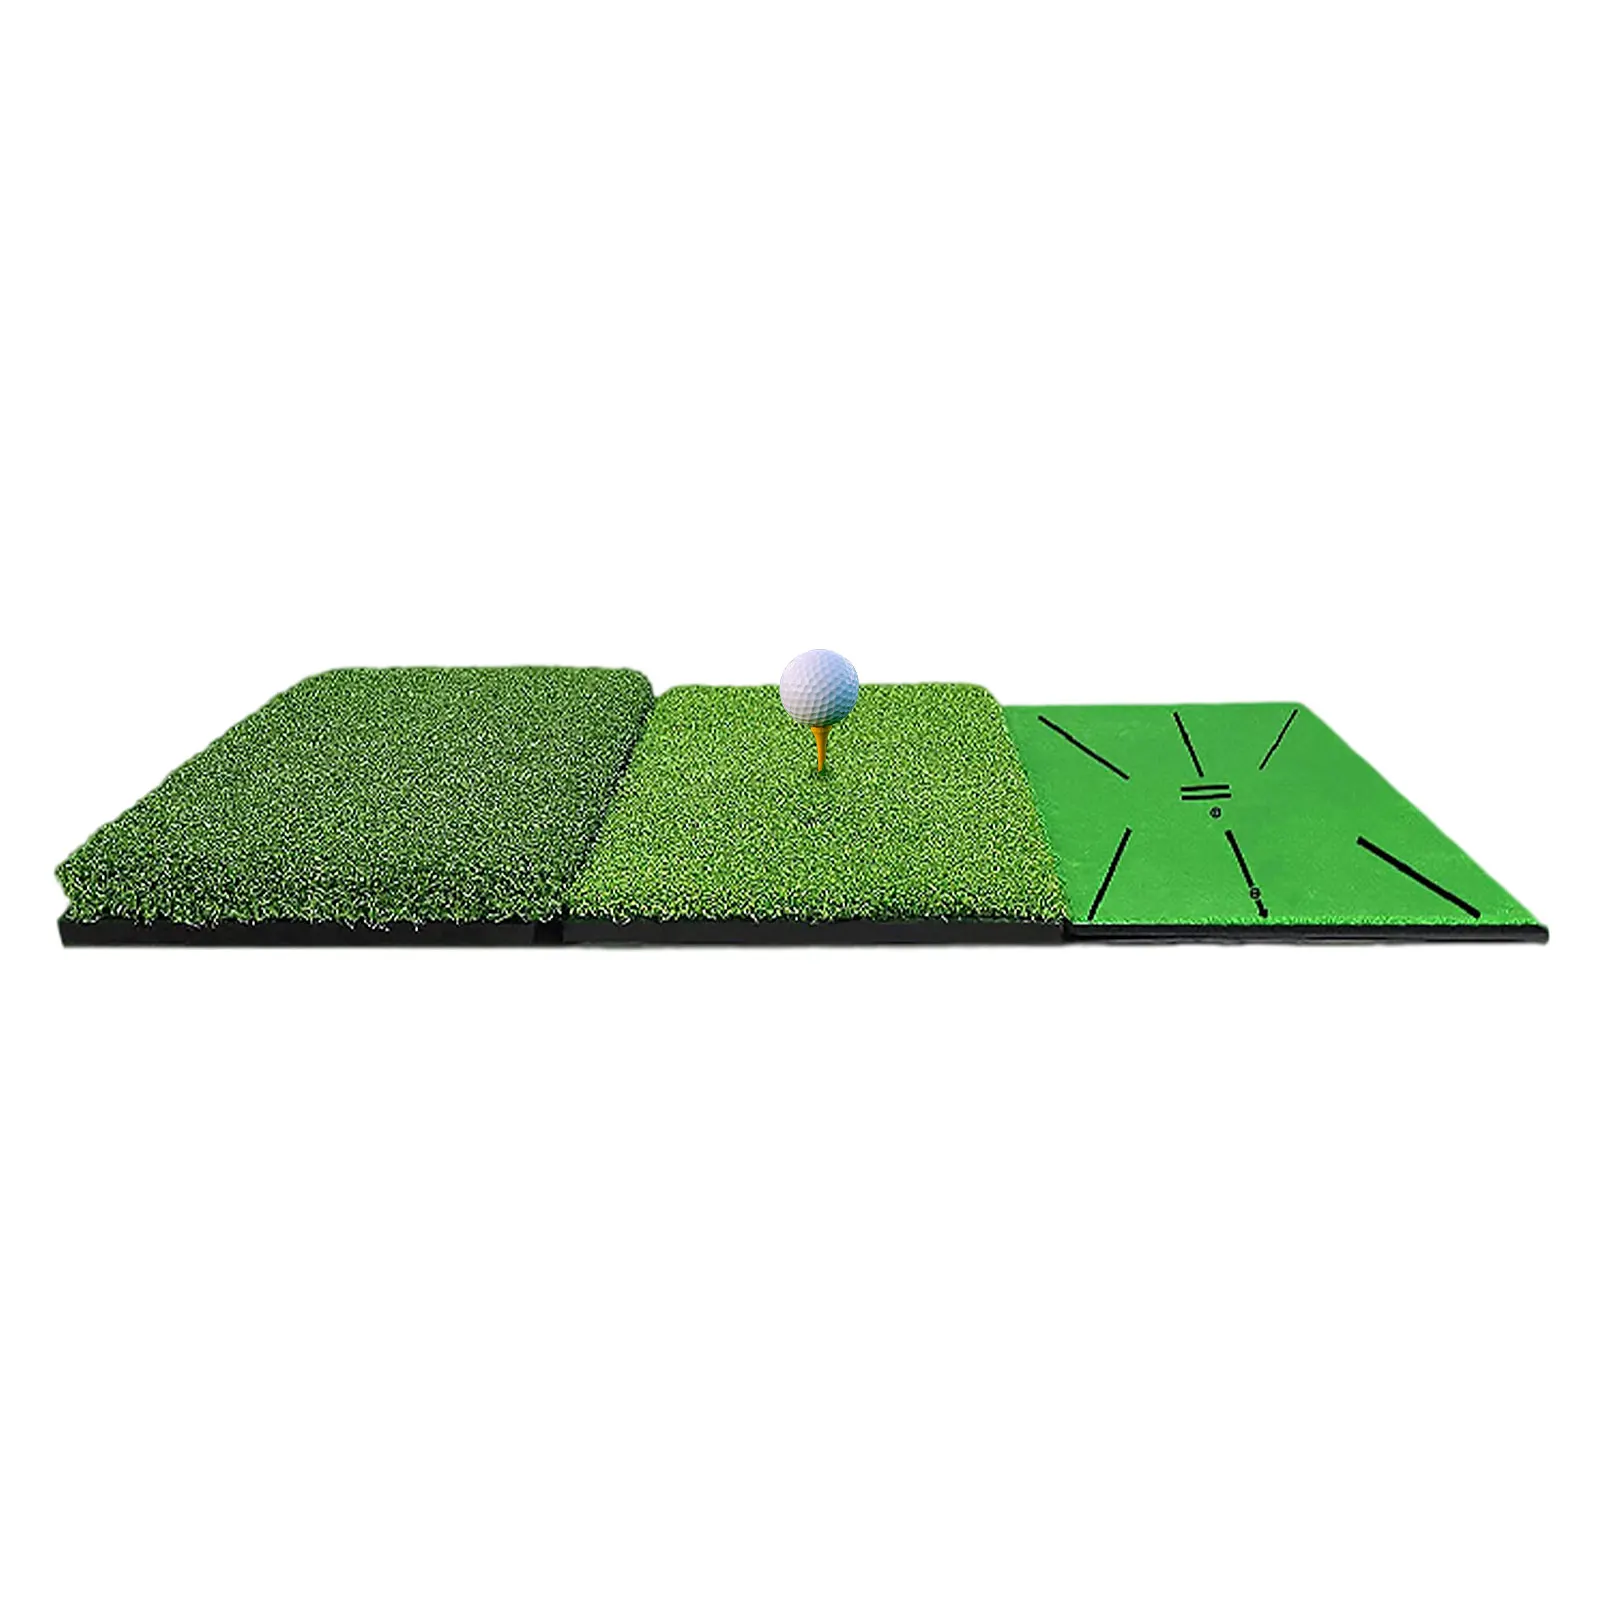 

Golf Hitting Mat Foldable Golf 3-in-1 Turf Grass Mat Portable And Convenient Large Turf Mat For Indoor And Outdoor Training